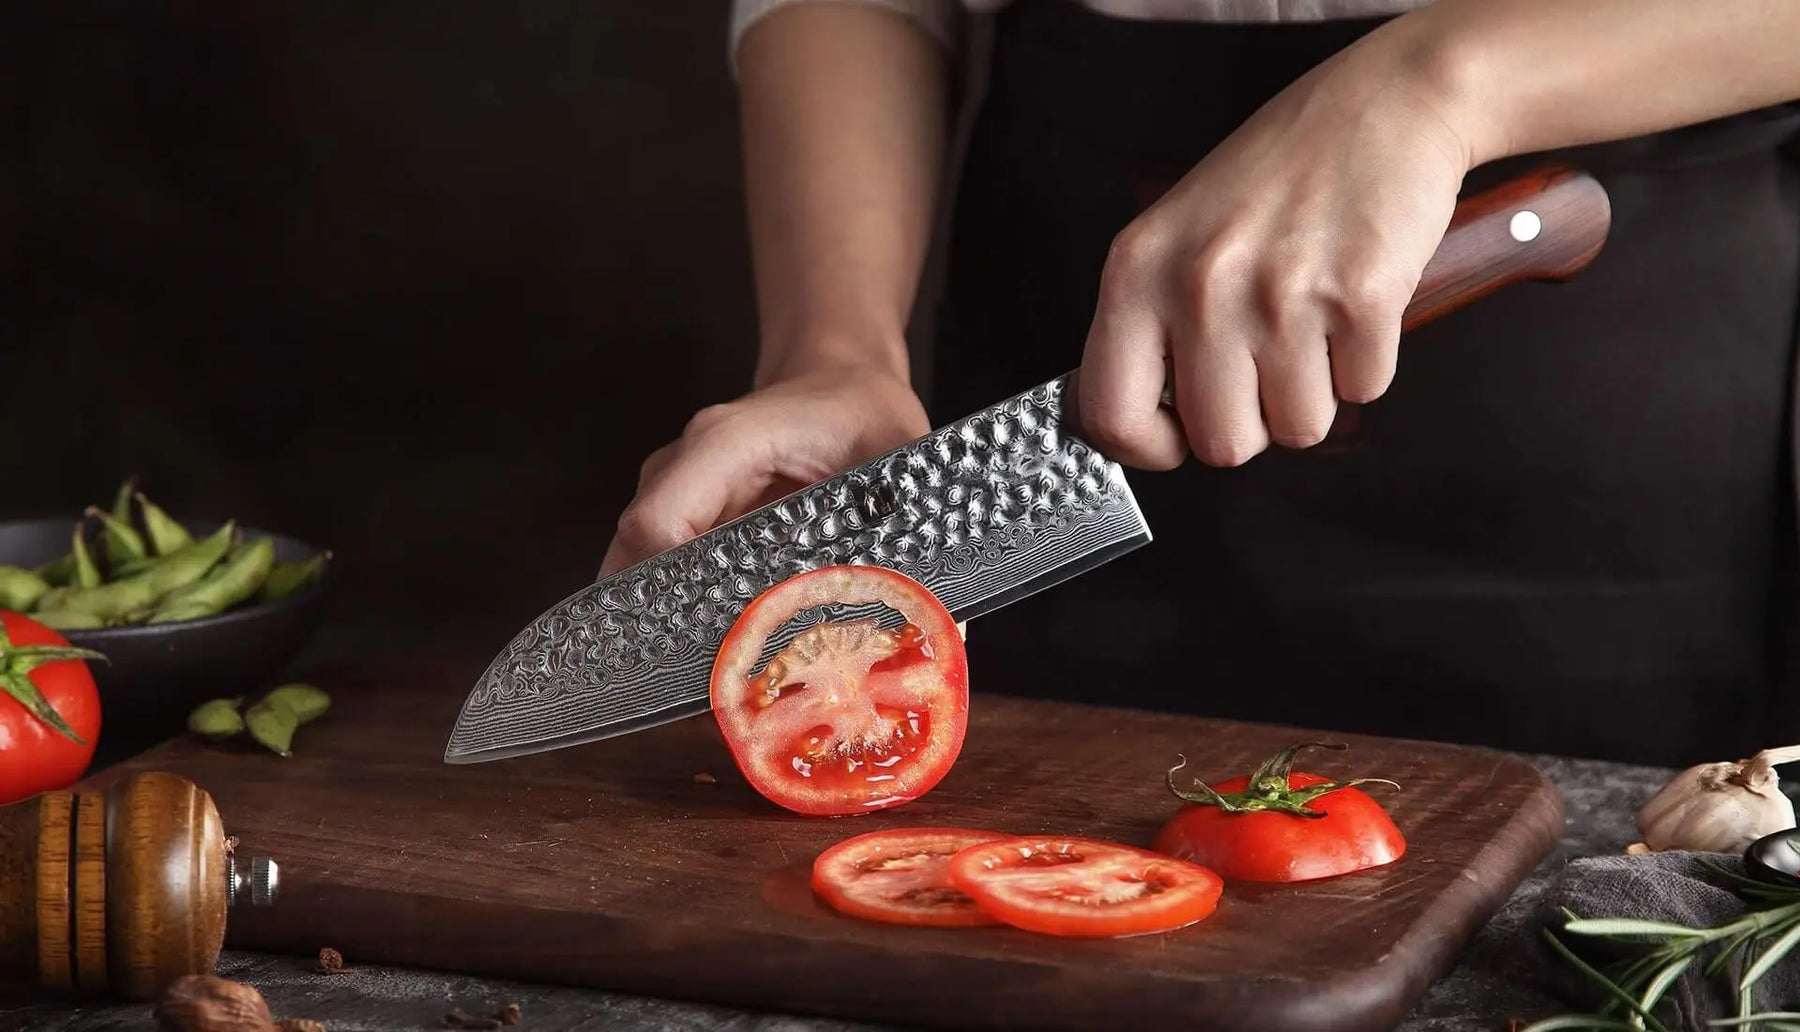 What is a Santoku Knife Used For?